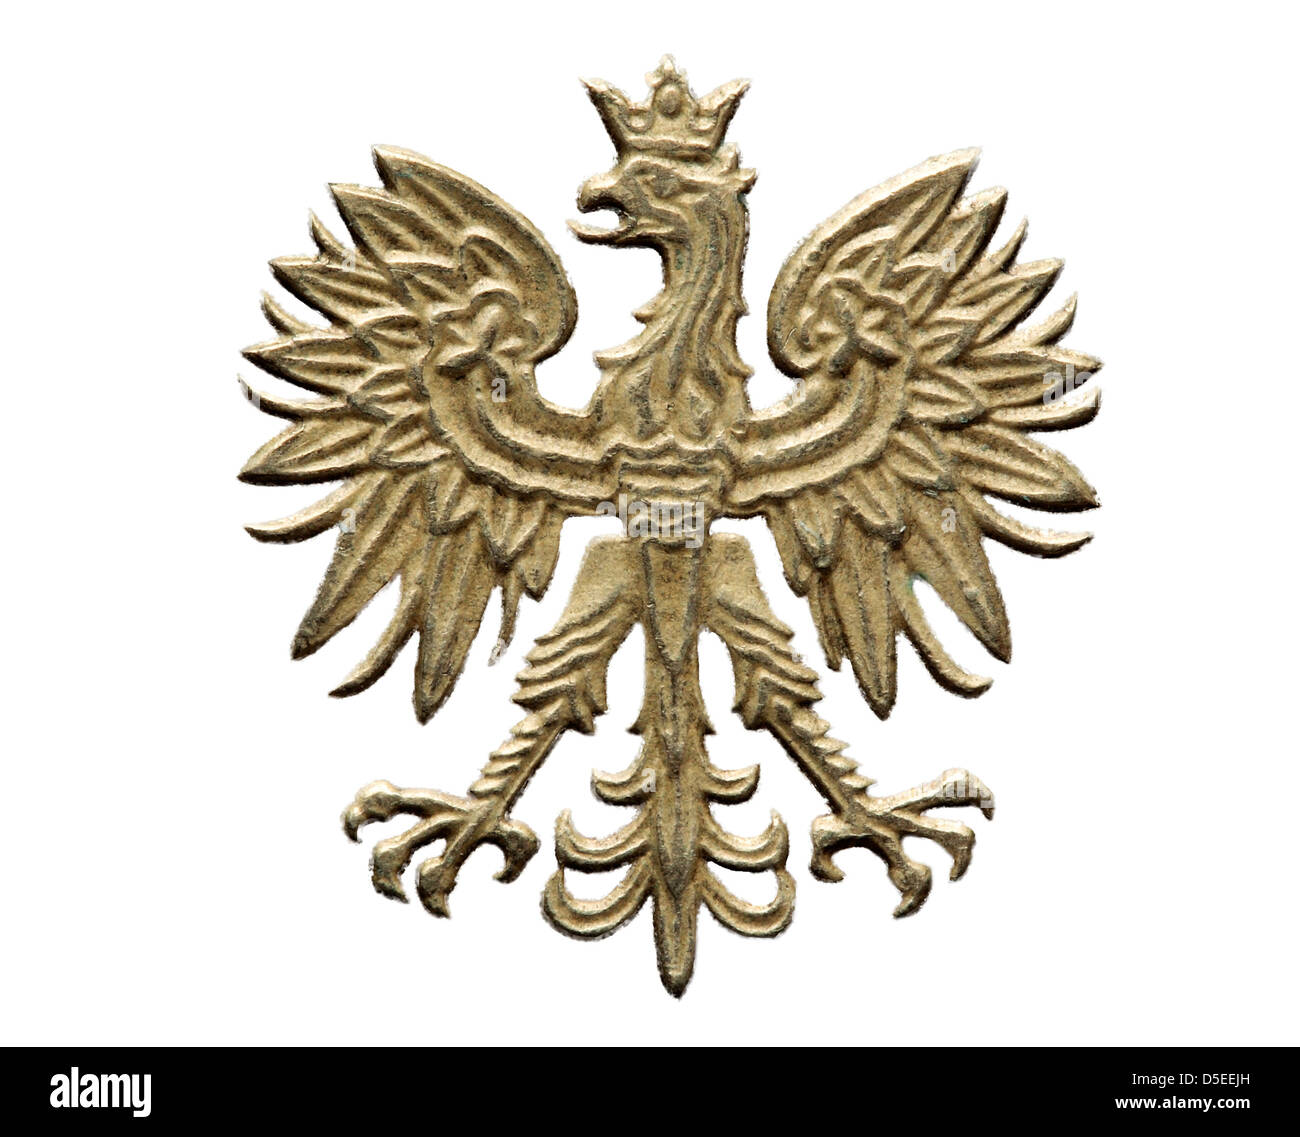 Polish coat of arms, eagle from 5 Zlotych coin, Poland, 1994, on white background Stock Photo